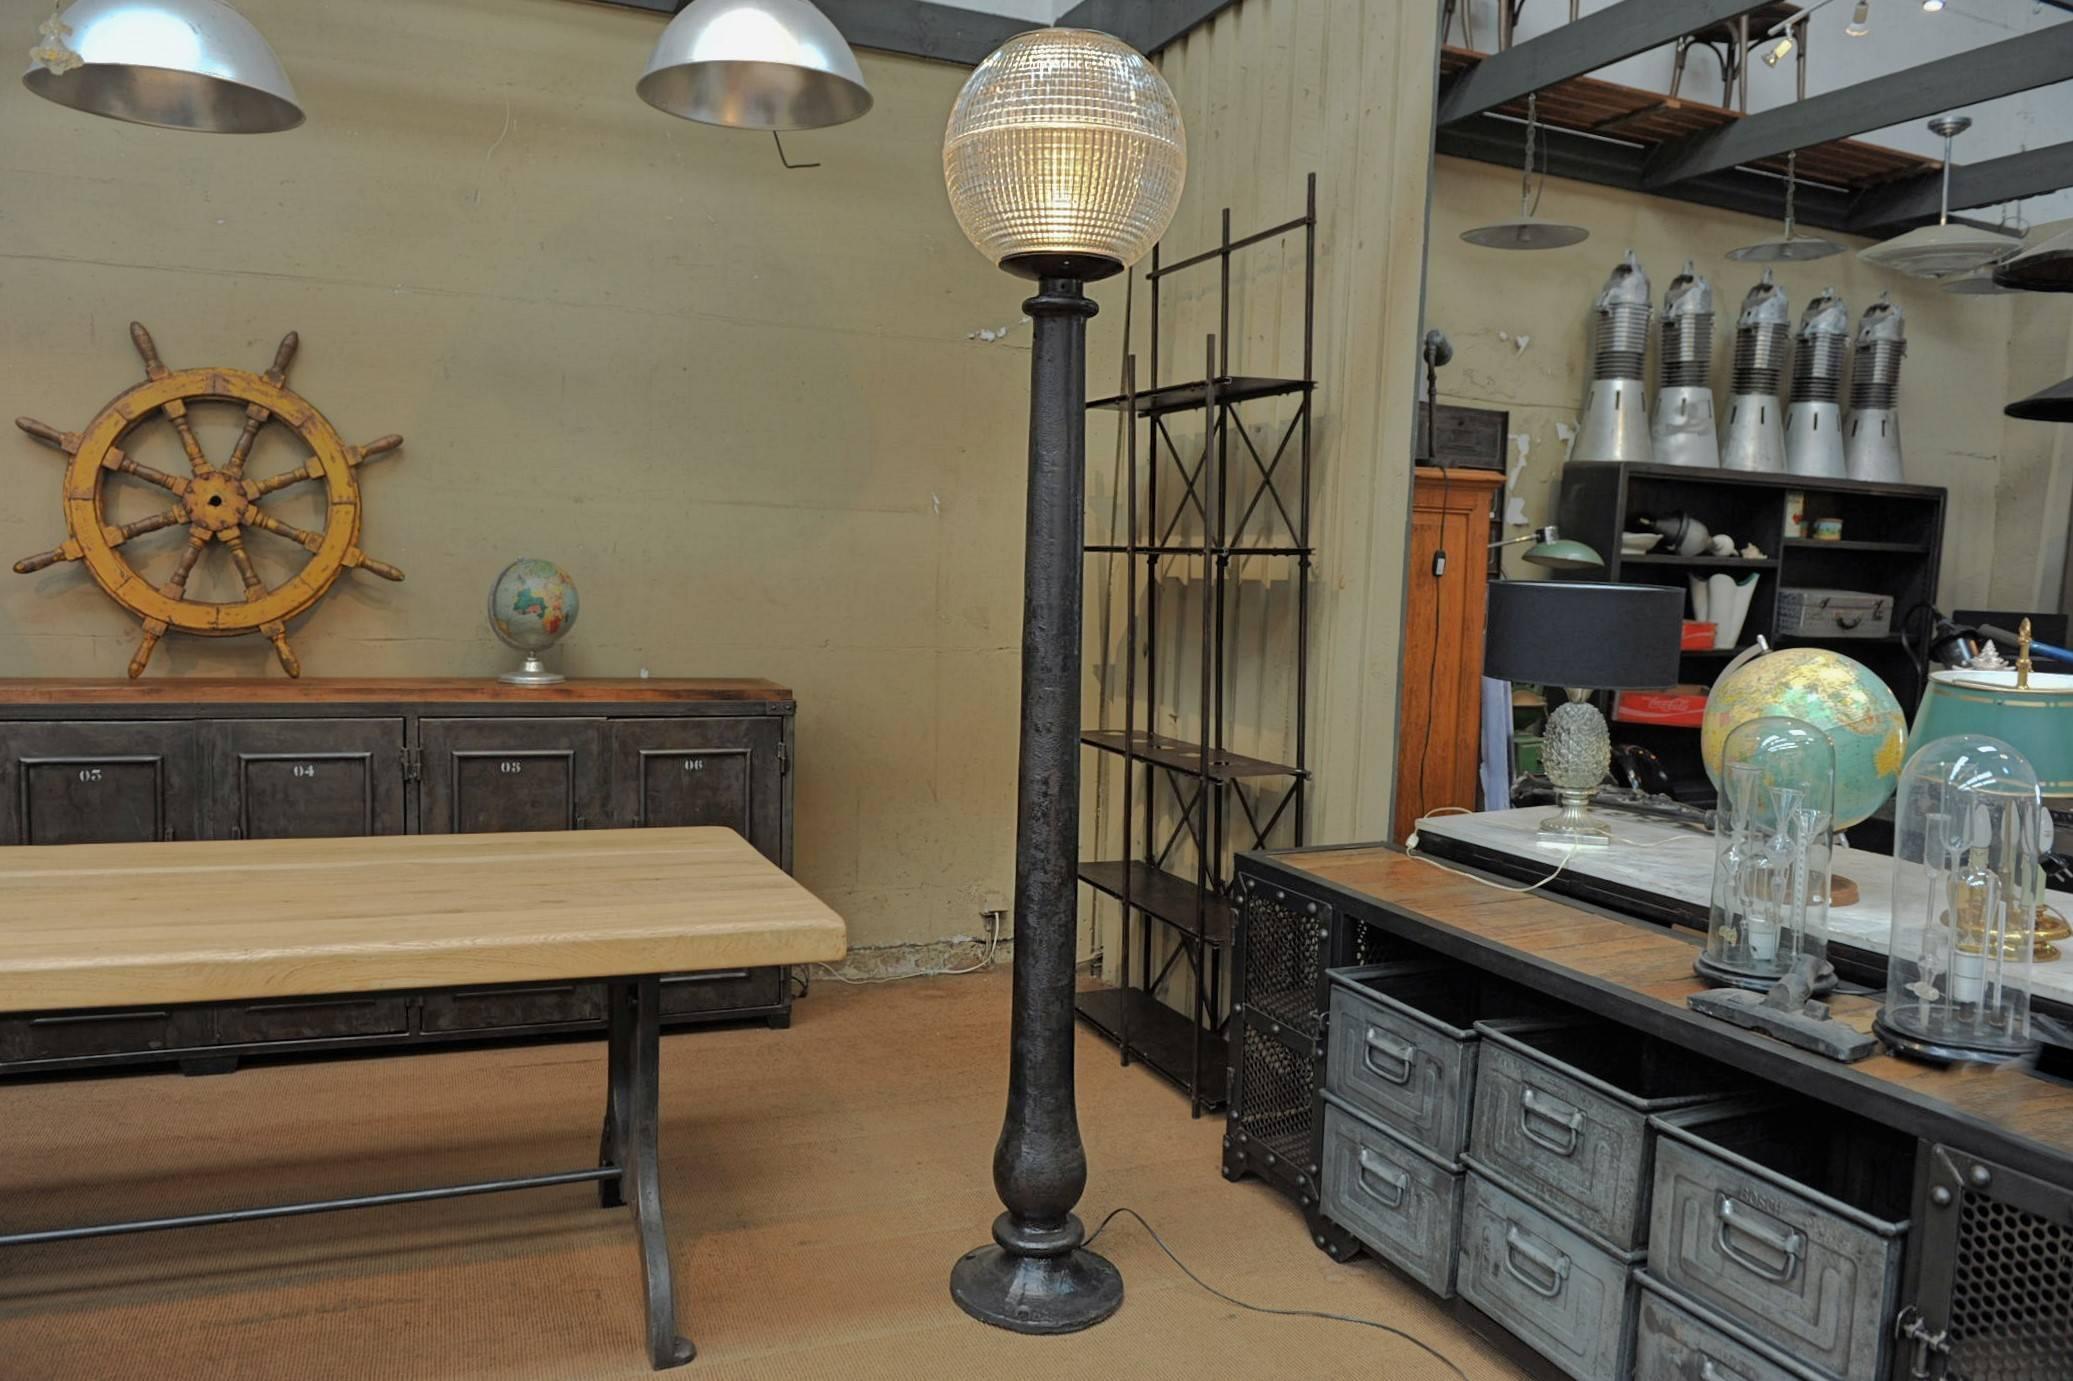 Original Holophane spherical glass and metal street light from Paris France circa 1960, turned into Industrial floor lamp with old polished cast iron column base, circa 1900.
The Holophane prismatic glass shades provides a combination of even